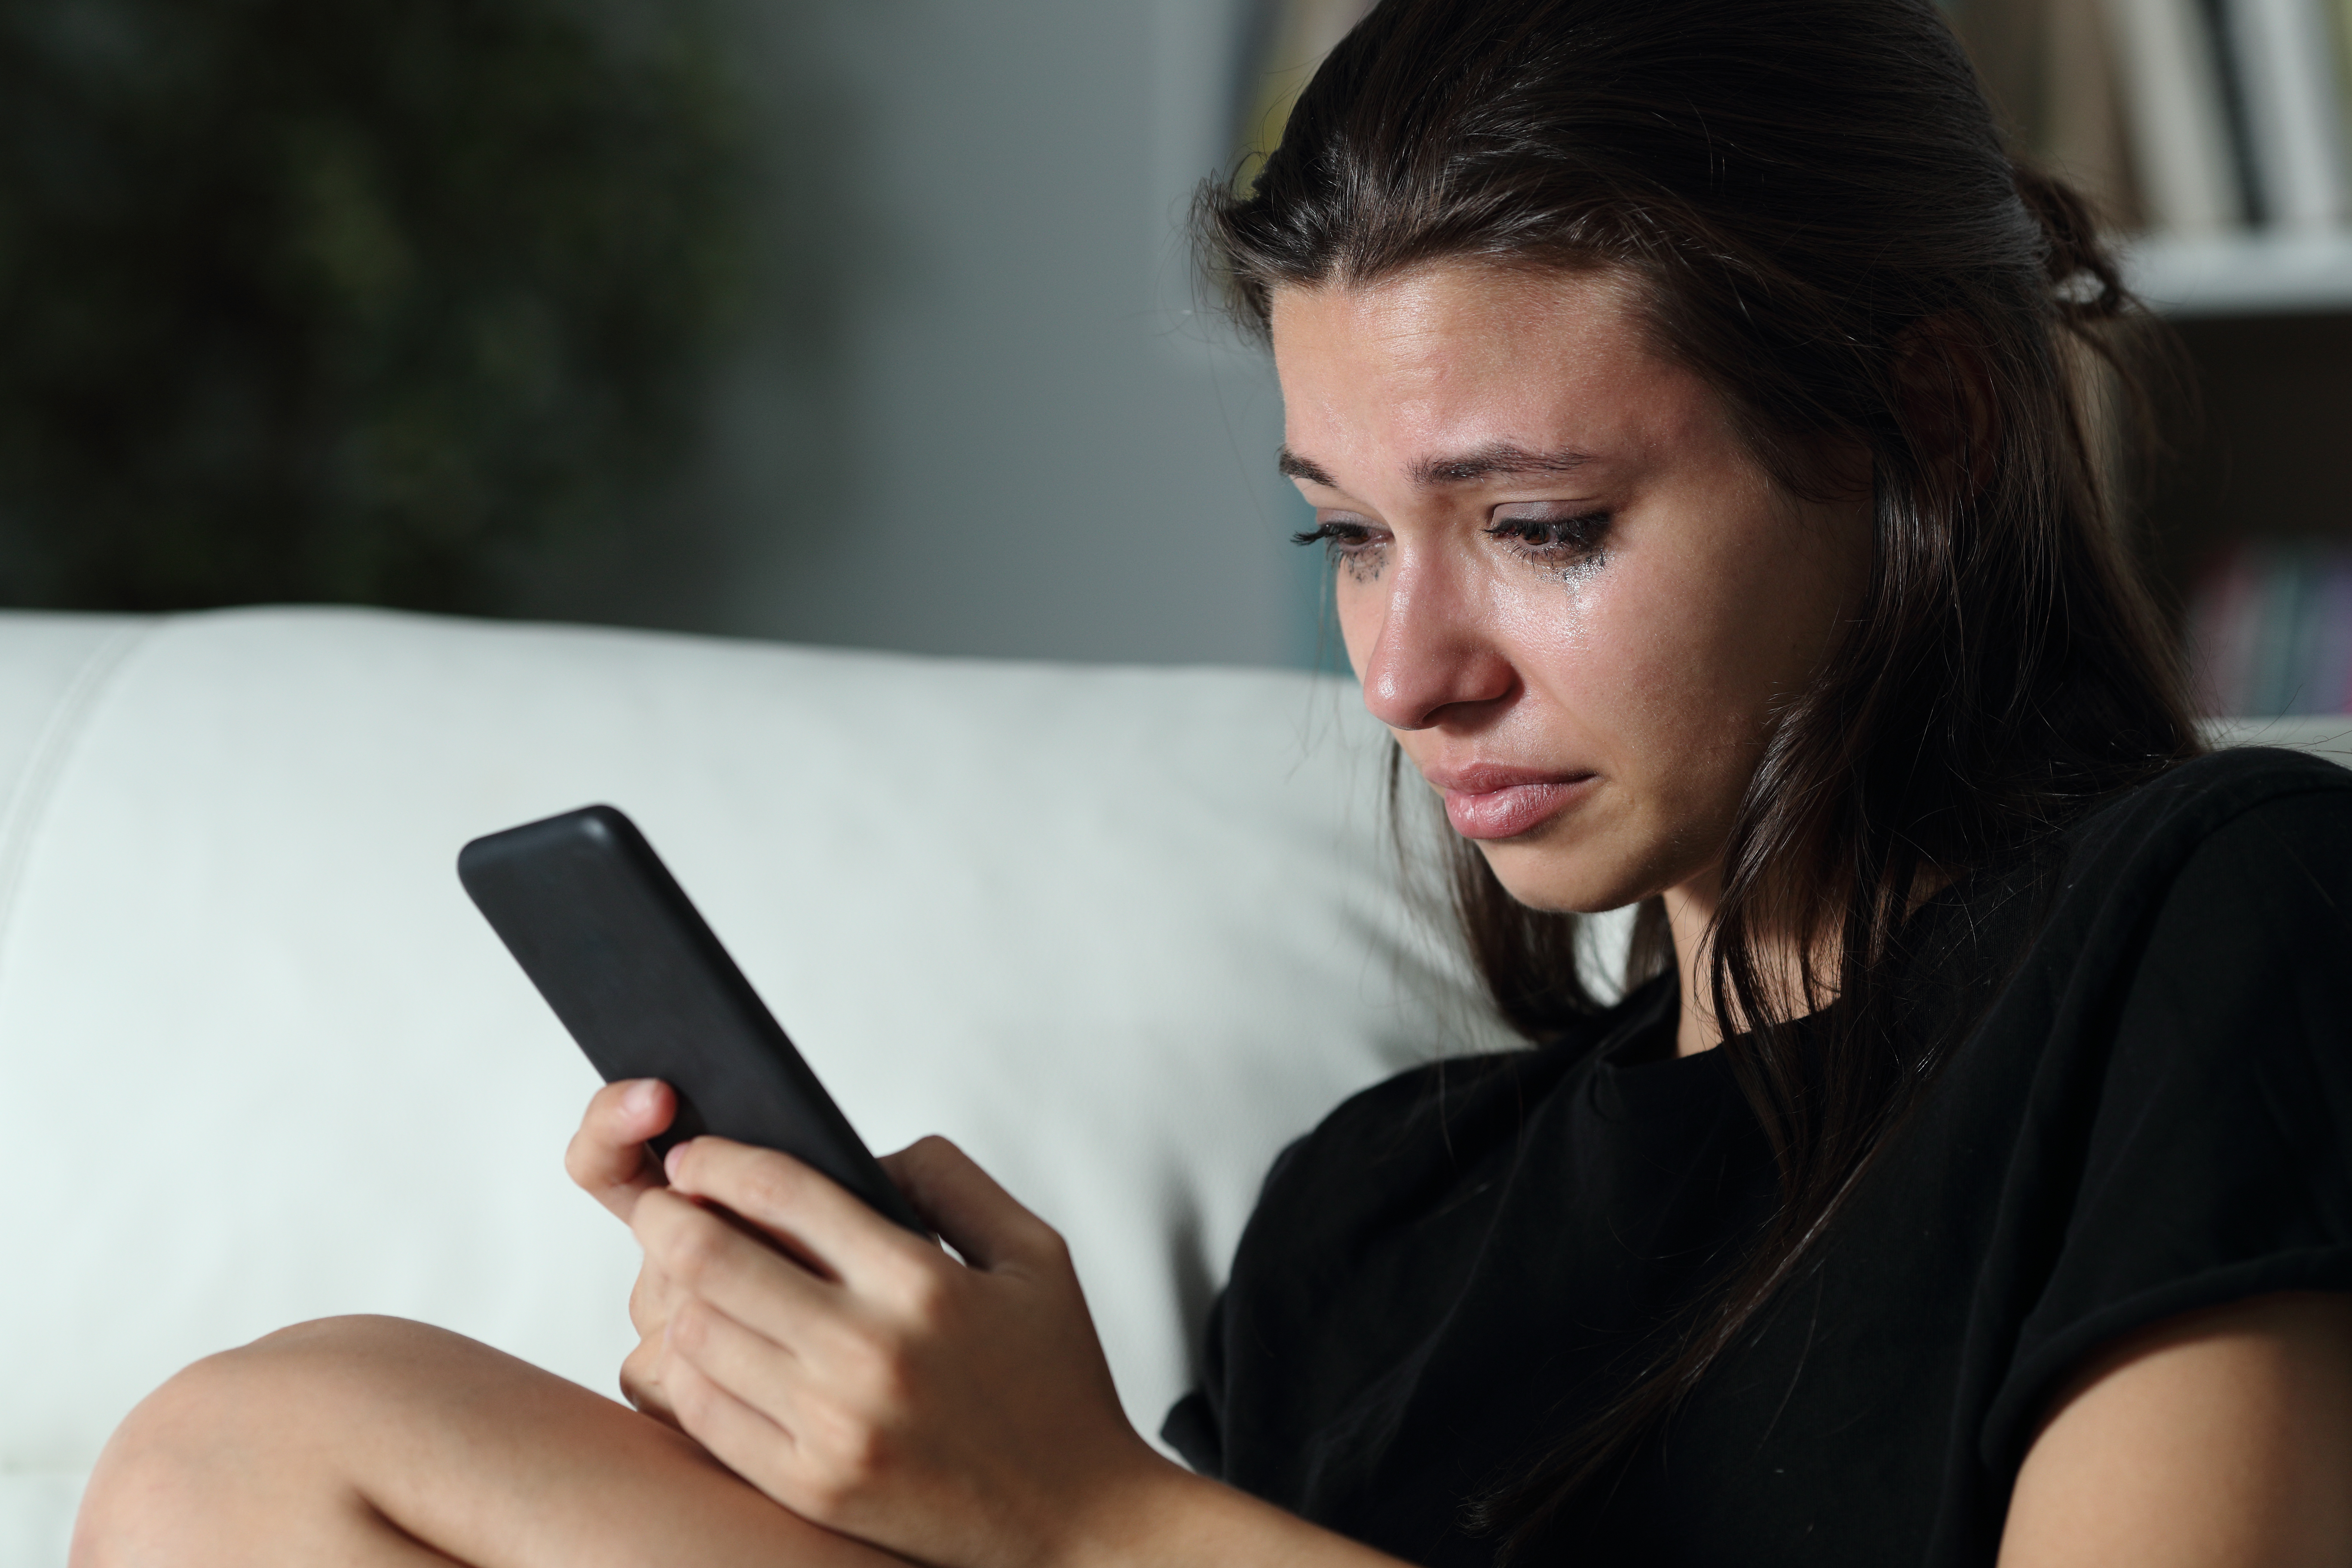 A sad woman cries after reading messages on her cell phone | Source: Shutterstock